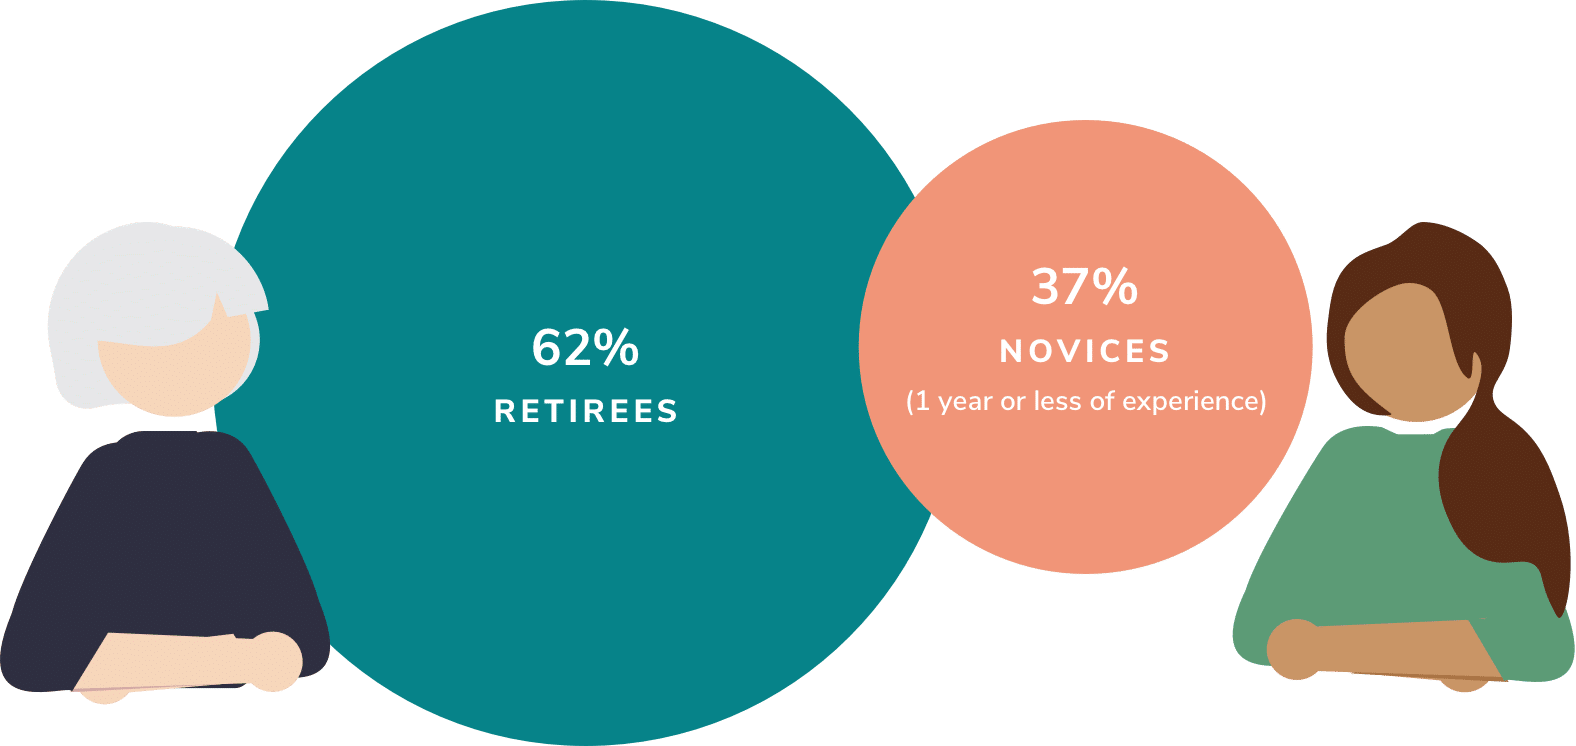 graphic of older female beside a circle saying "62% retirees" and a graphic of a youthful female beside a circle saying "37% novices (1 year or less of experience)"